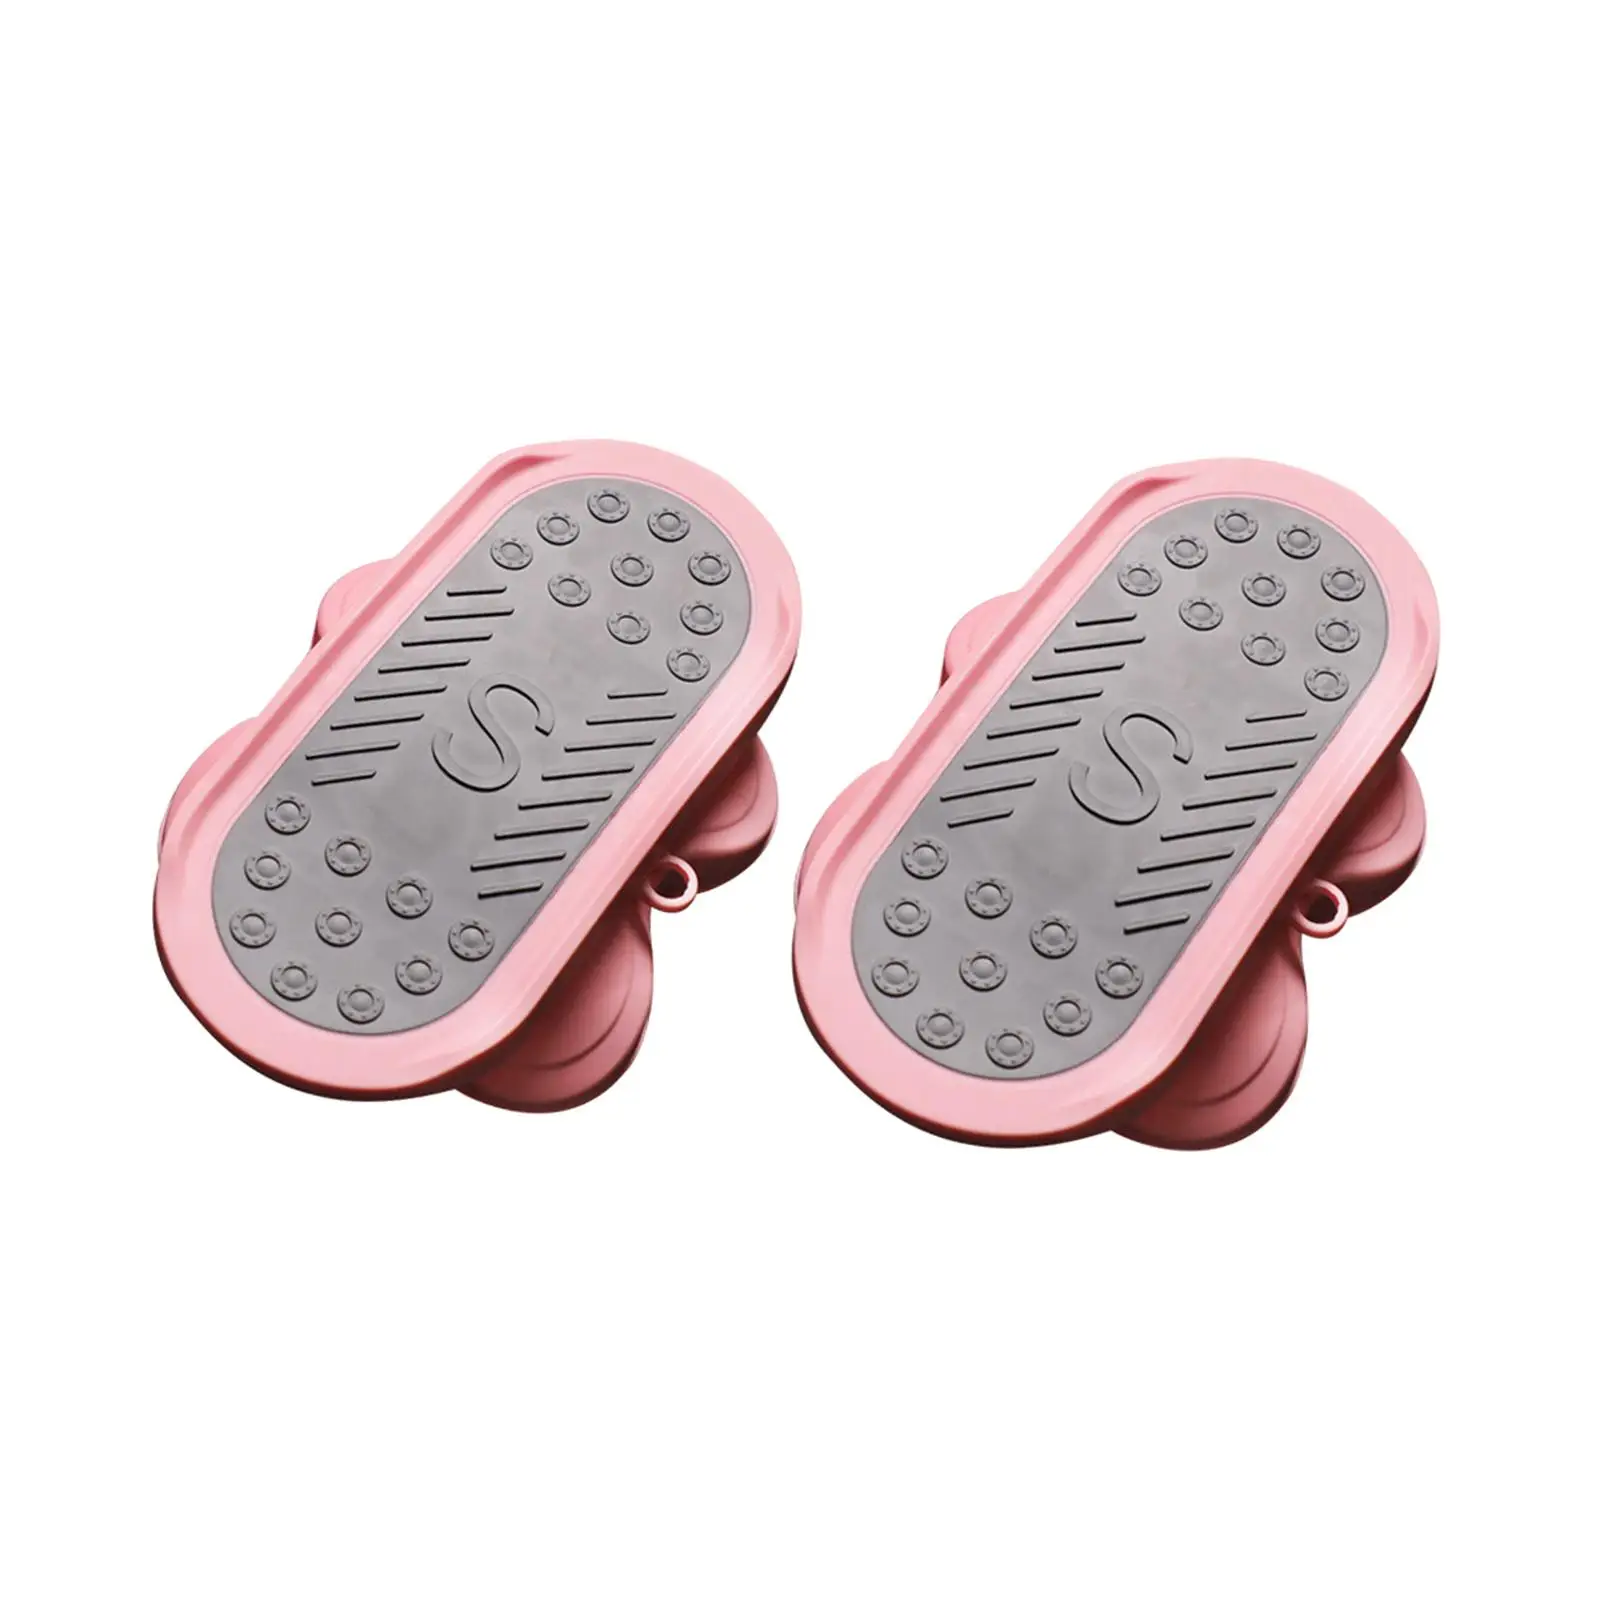 2x Ab Twisting Board Aerobic Exercise Balance Boards Foot Massage Mute Machine Waist Twist Disc for Shaping Gym